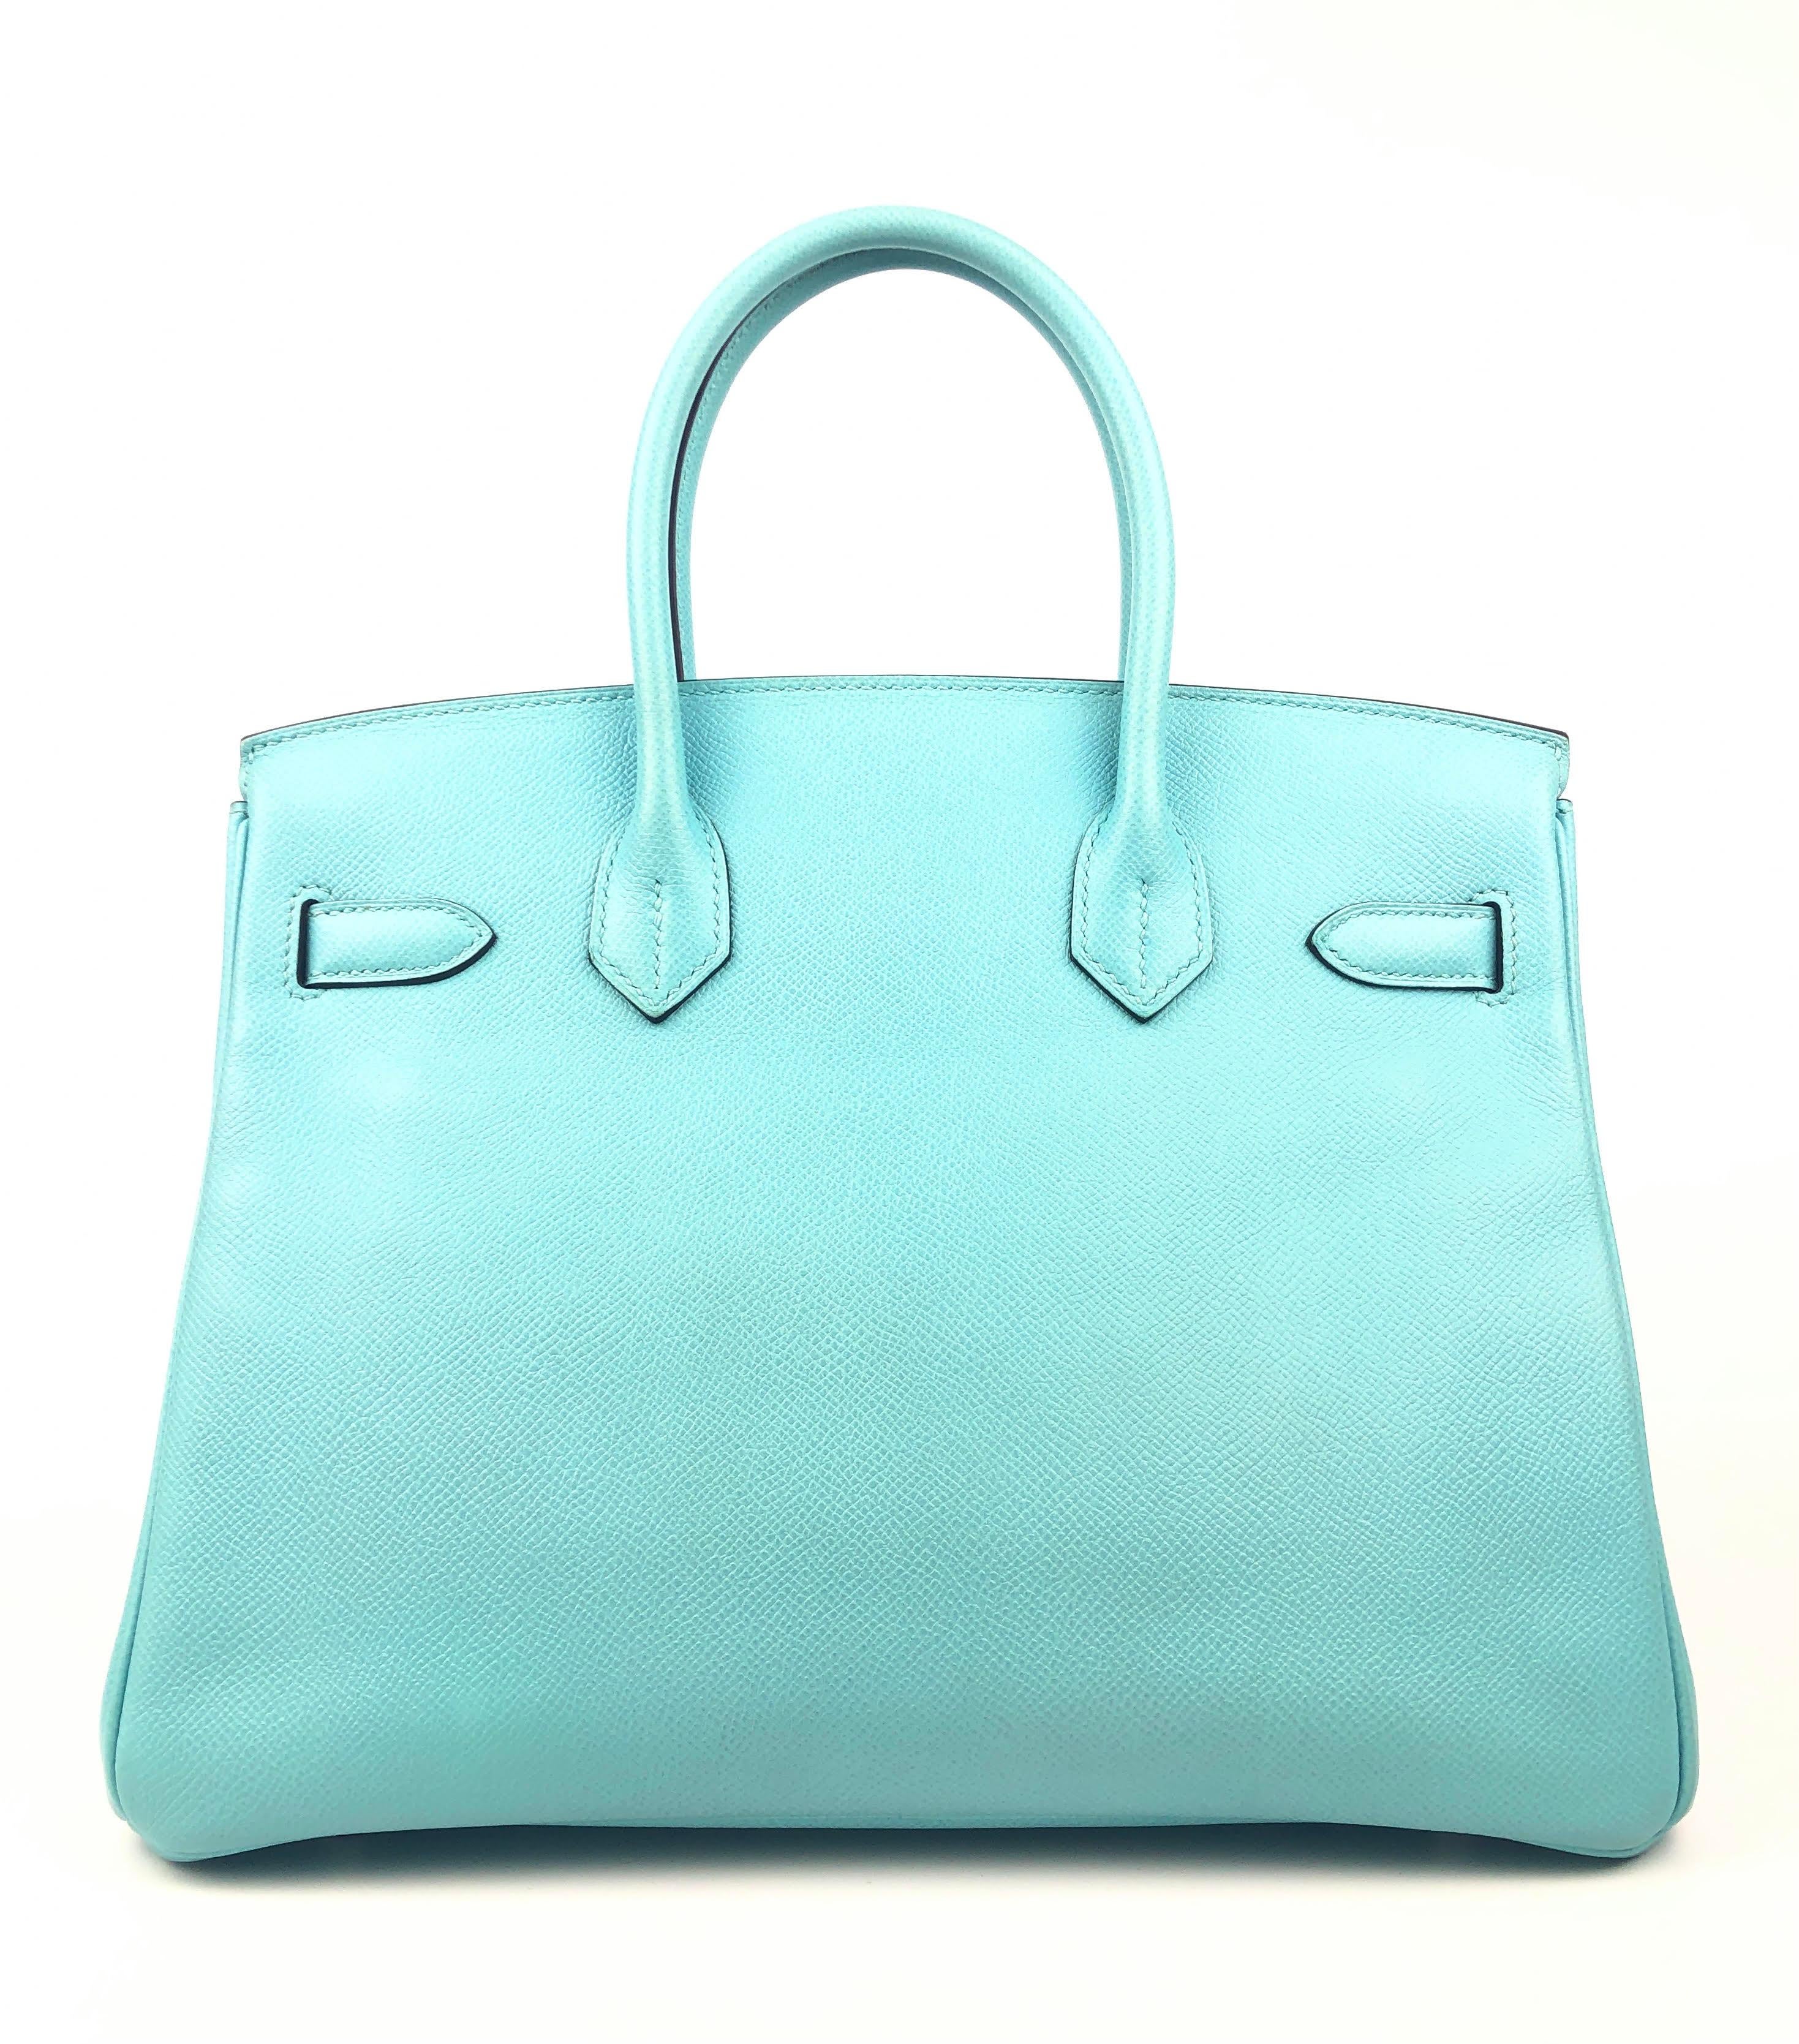 This authentic Hermès Robin’s Egg Blue Epsom 30 cm Birkin is in pristine unworn condition; the protective plastic is still intact on the hardware.    Considered the ultimate luxury item, the Hermès Birkin is stitched by hand. Waitlists are